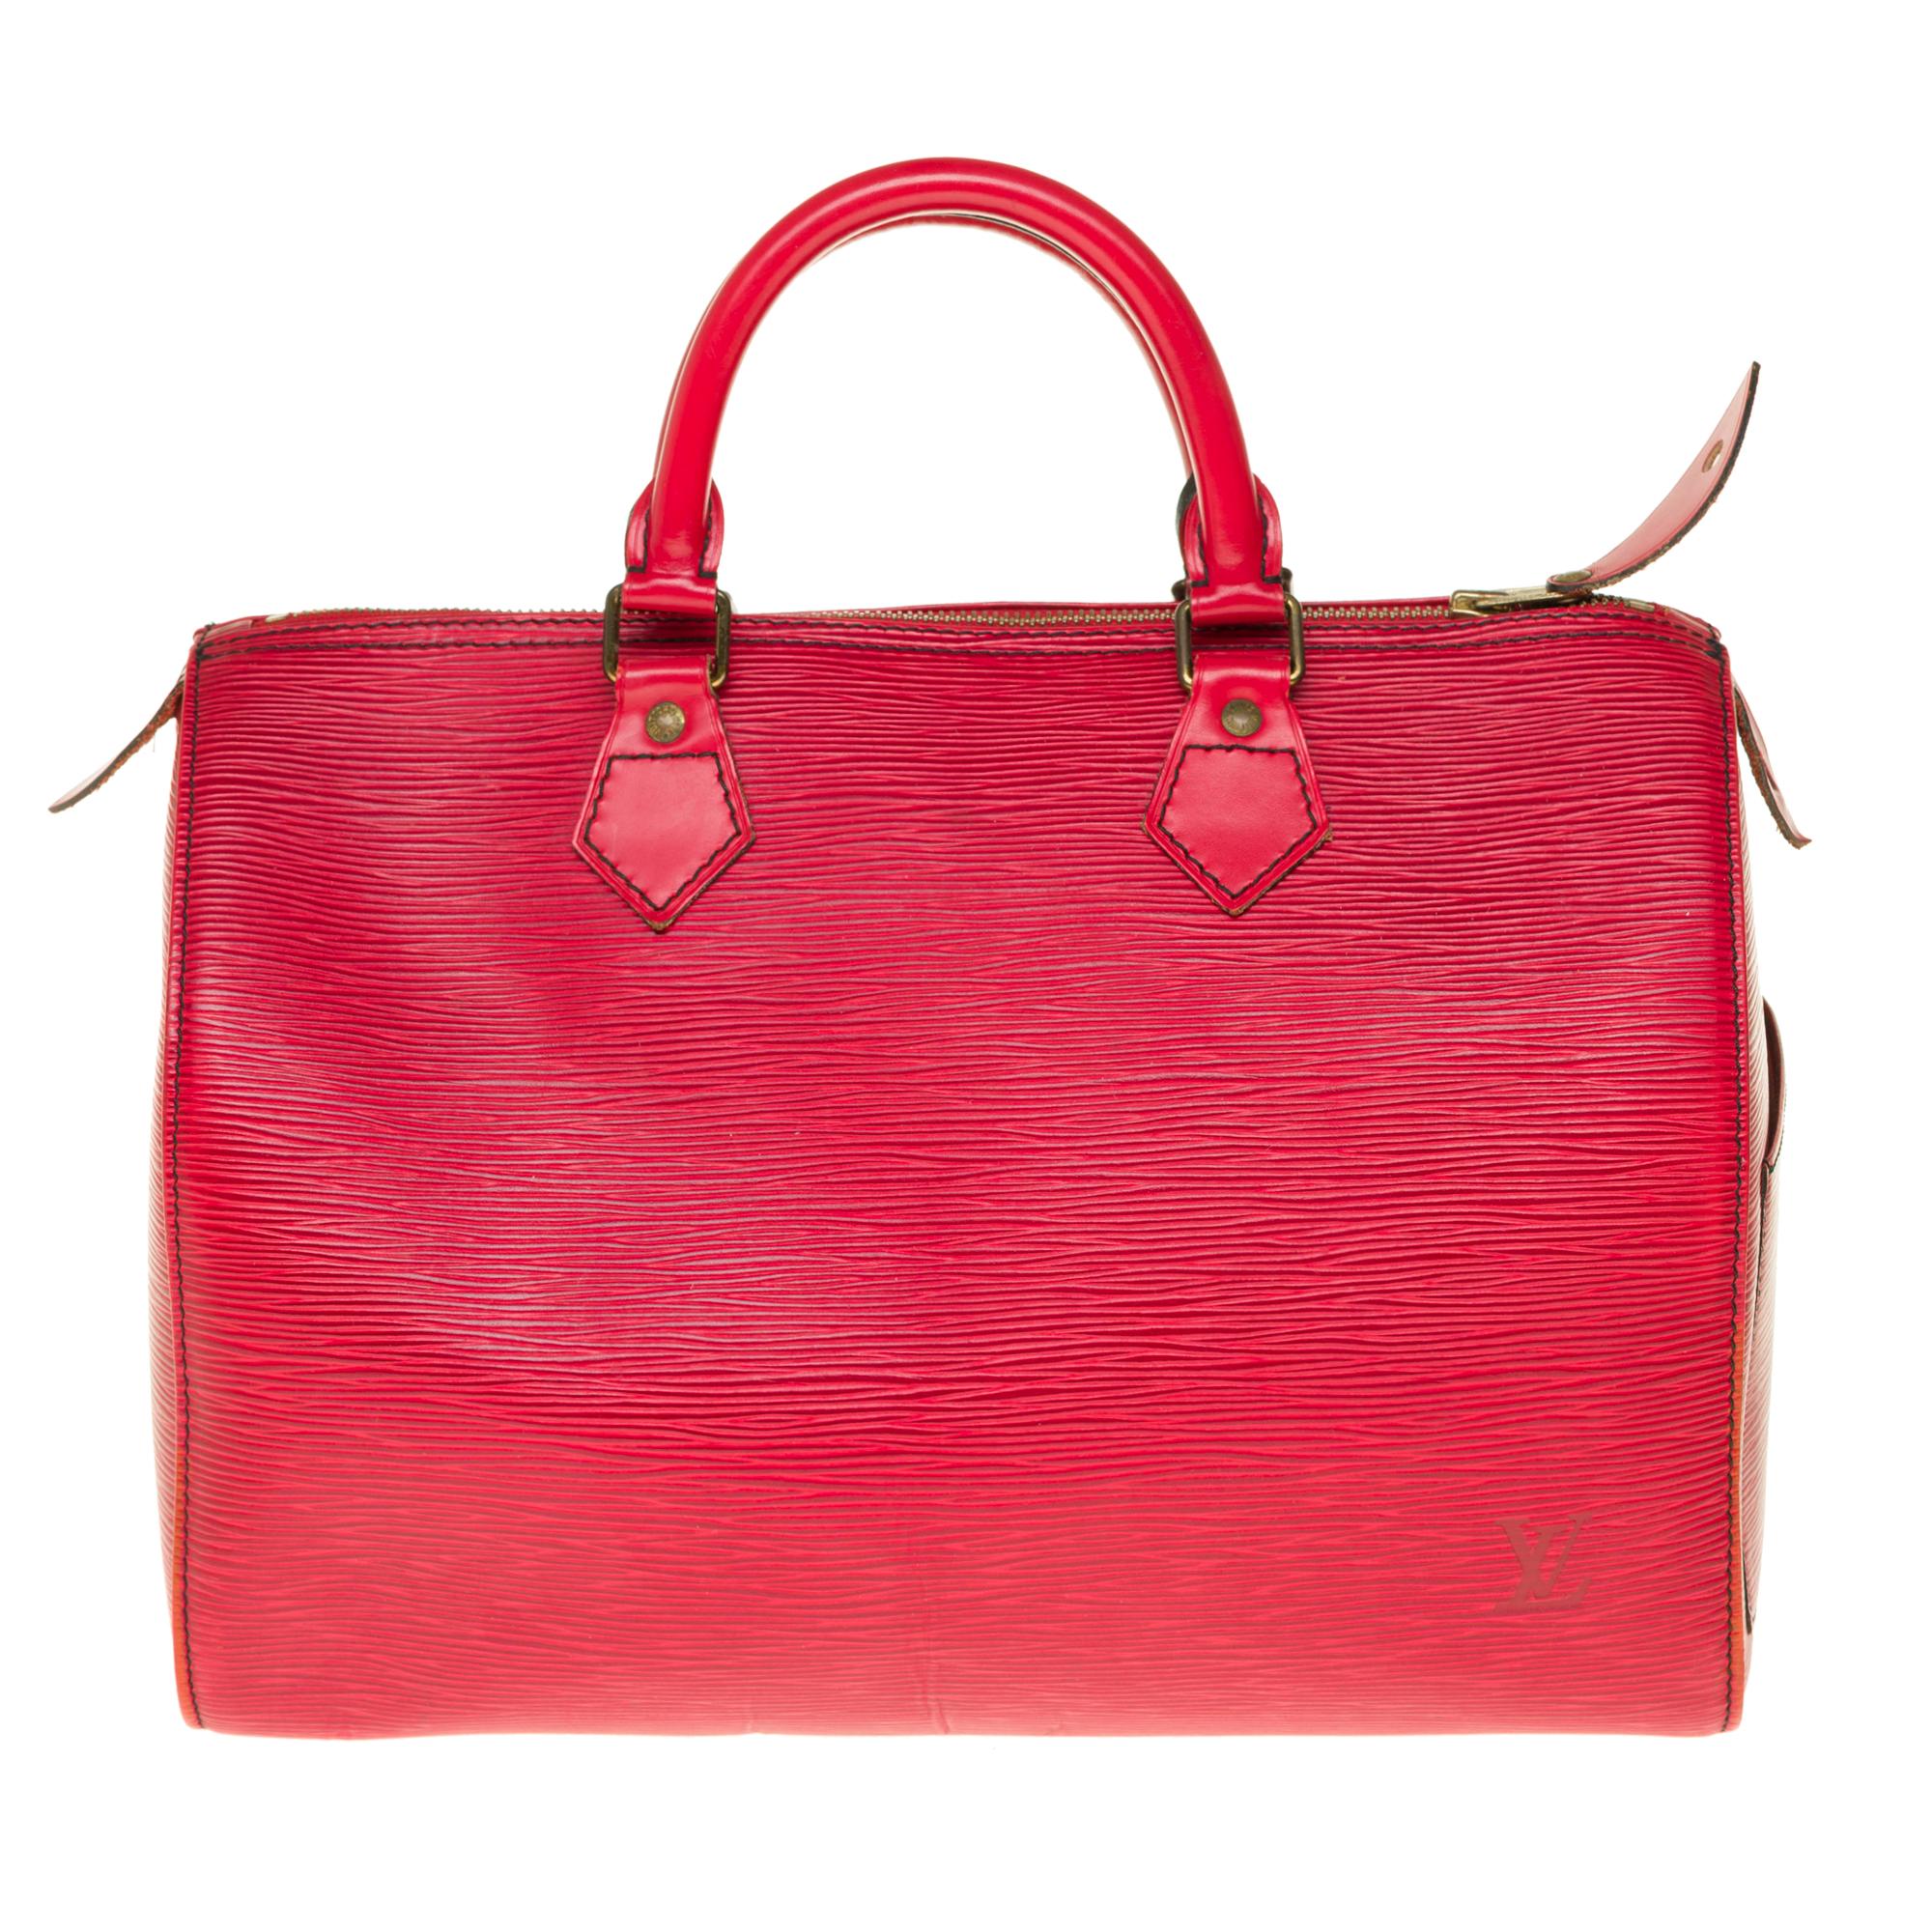 Superb Louis Vuitton Speedy 35 handbag in red epi leather, gold metal trim, double handle in red leather for a carry.
Double zip closure.
Interior in red suede.
Signature: 